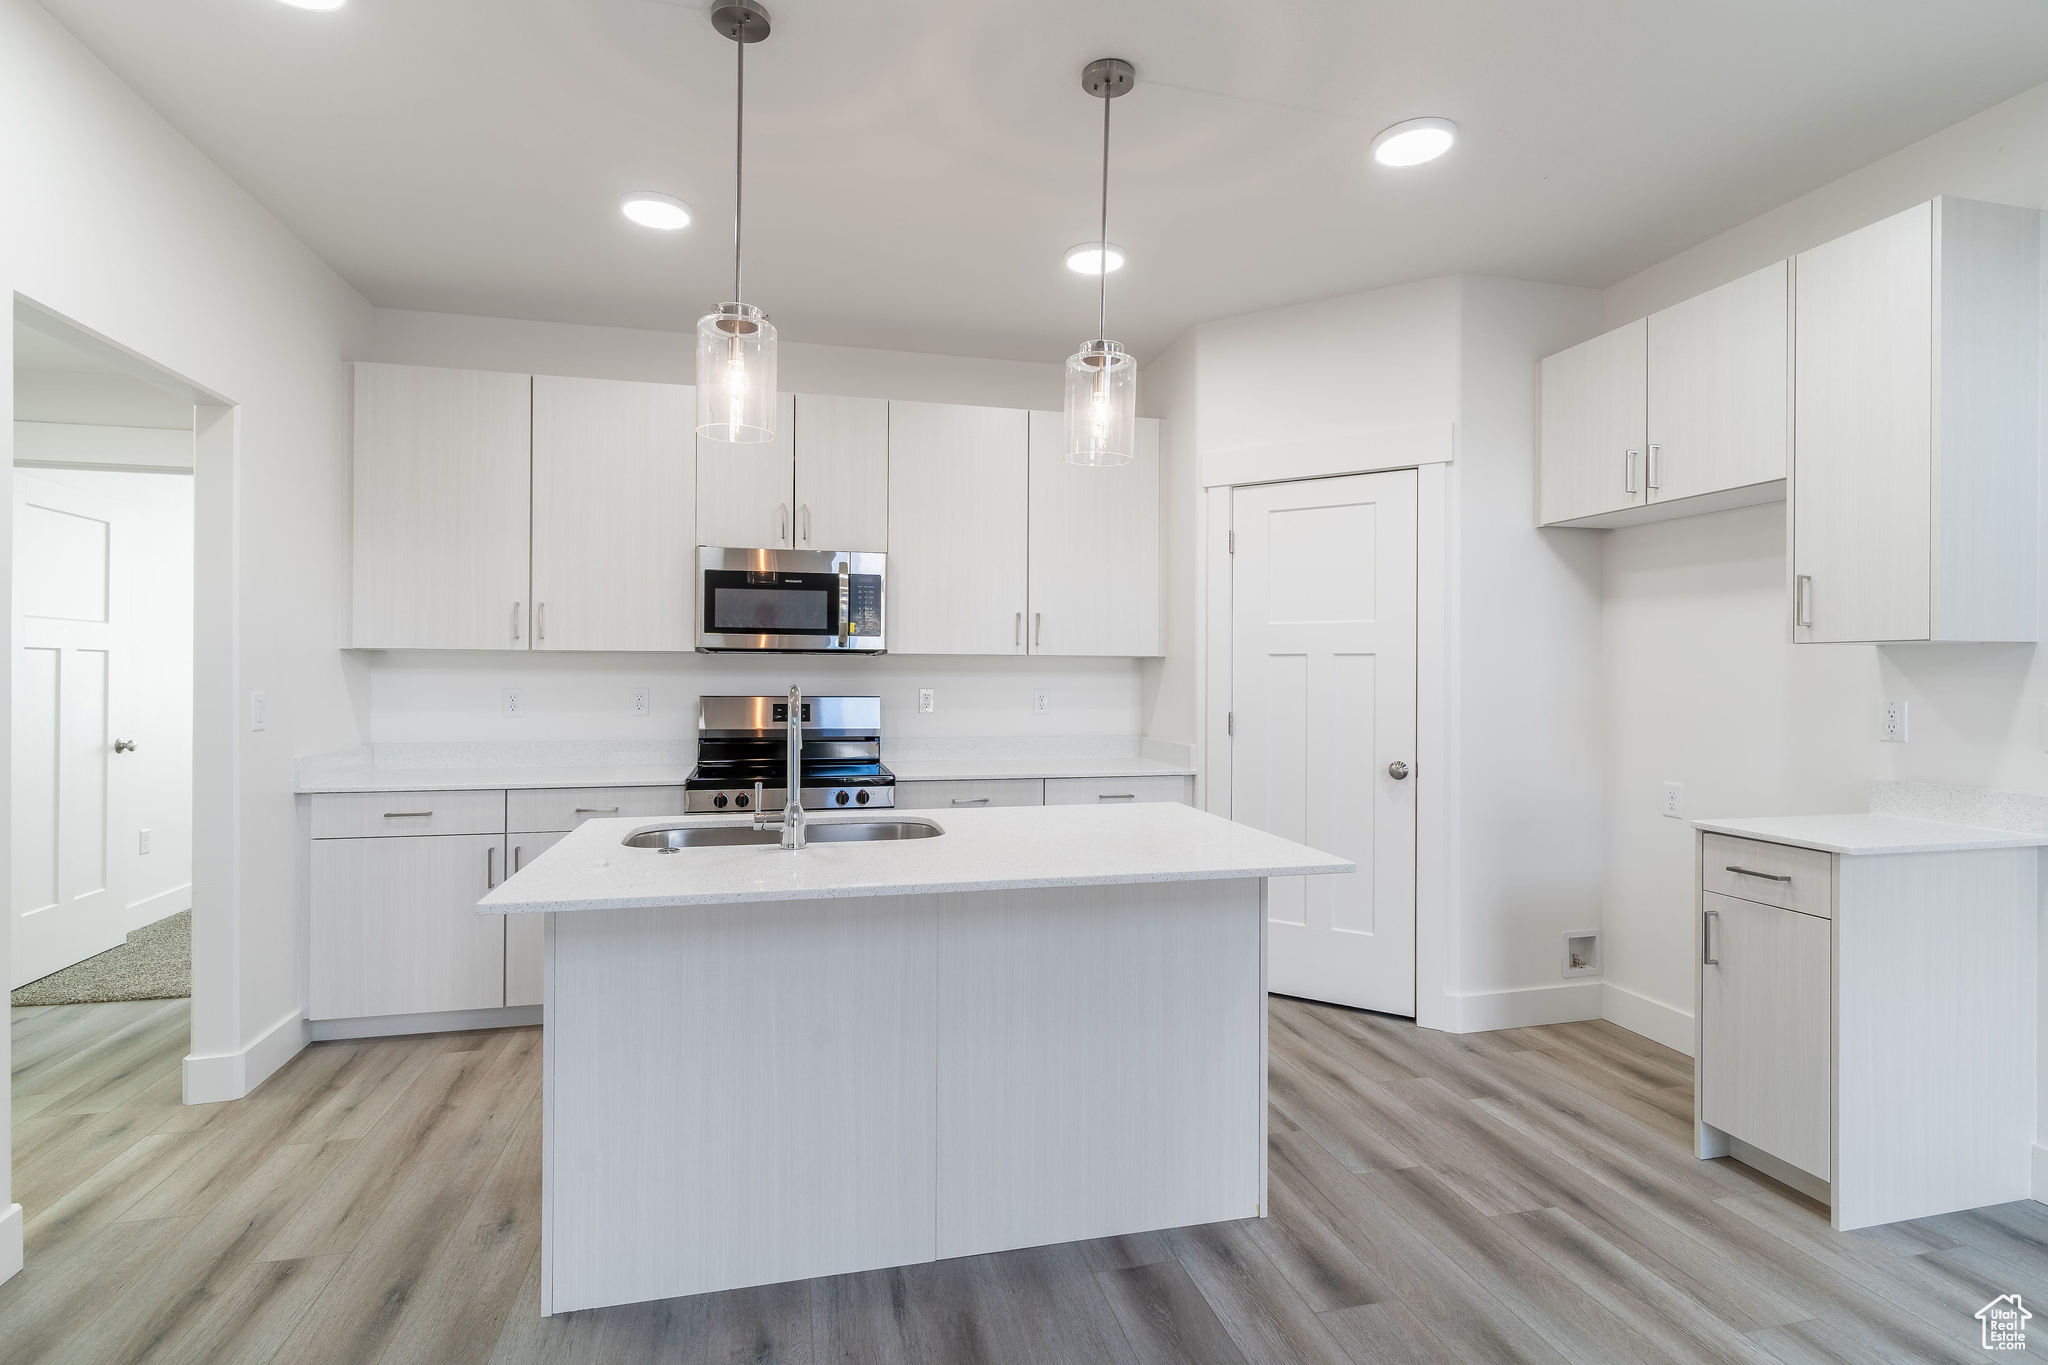 Kitchen with appliances with stainless steel finishes, white cabinetry, and a kitchen island with sink